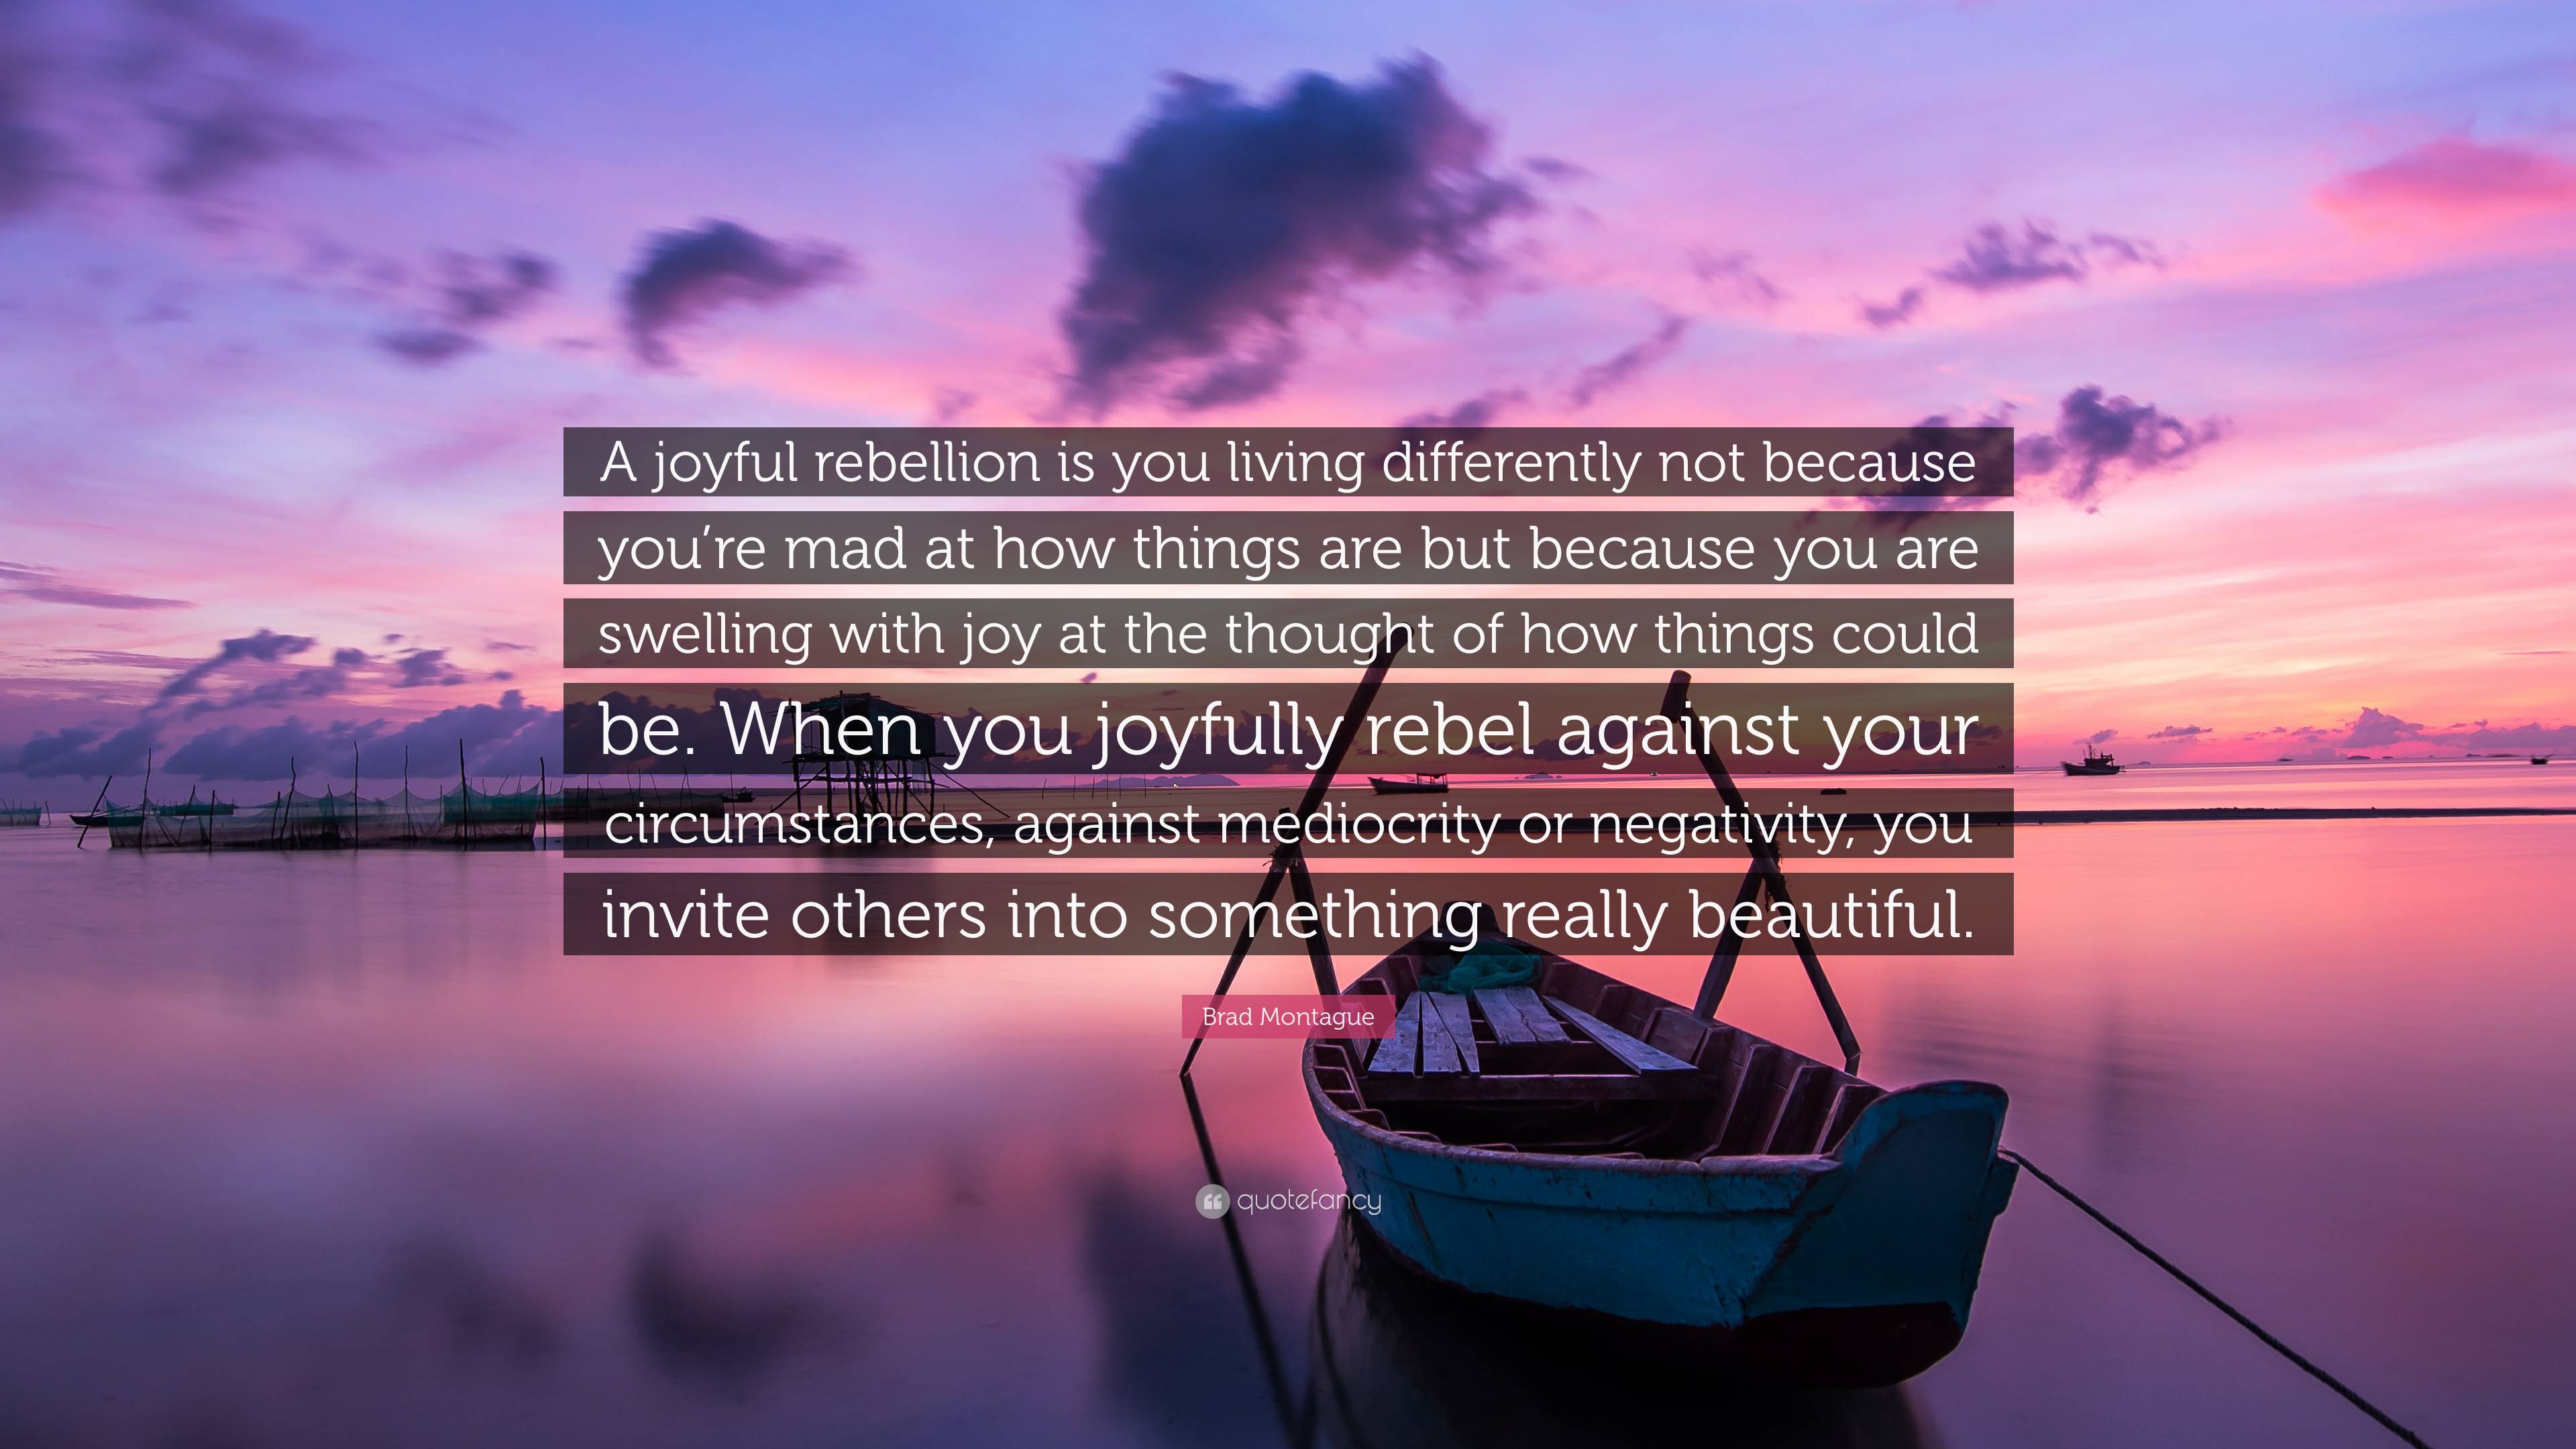 Brad Montague Quote: “A joyful rebellion is you living differently not ...